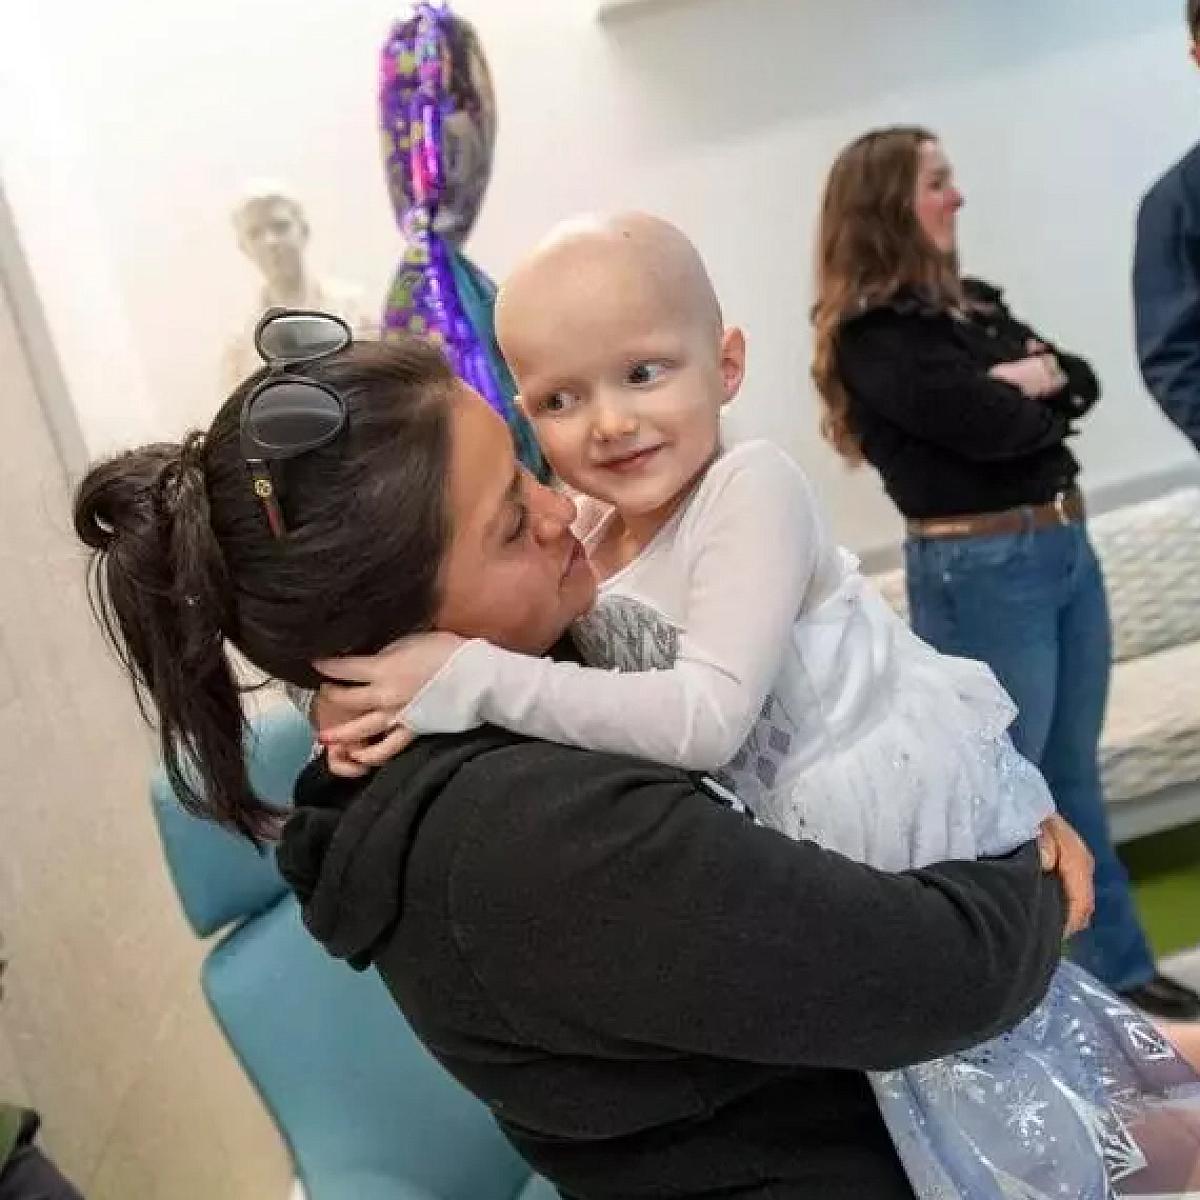 Parker getting a hug while celebrating the end of her chemotherapy treatment